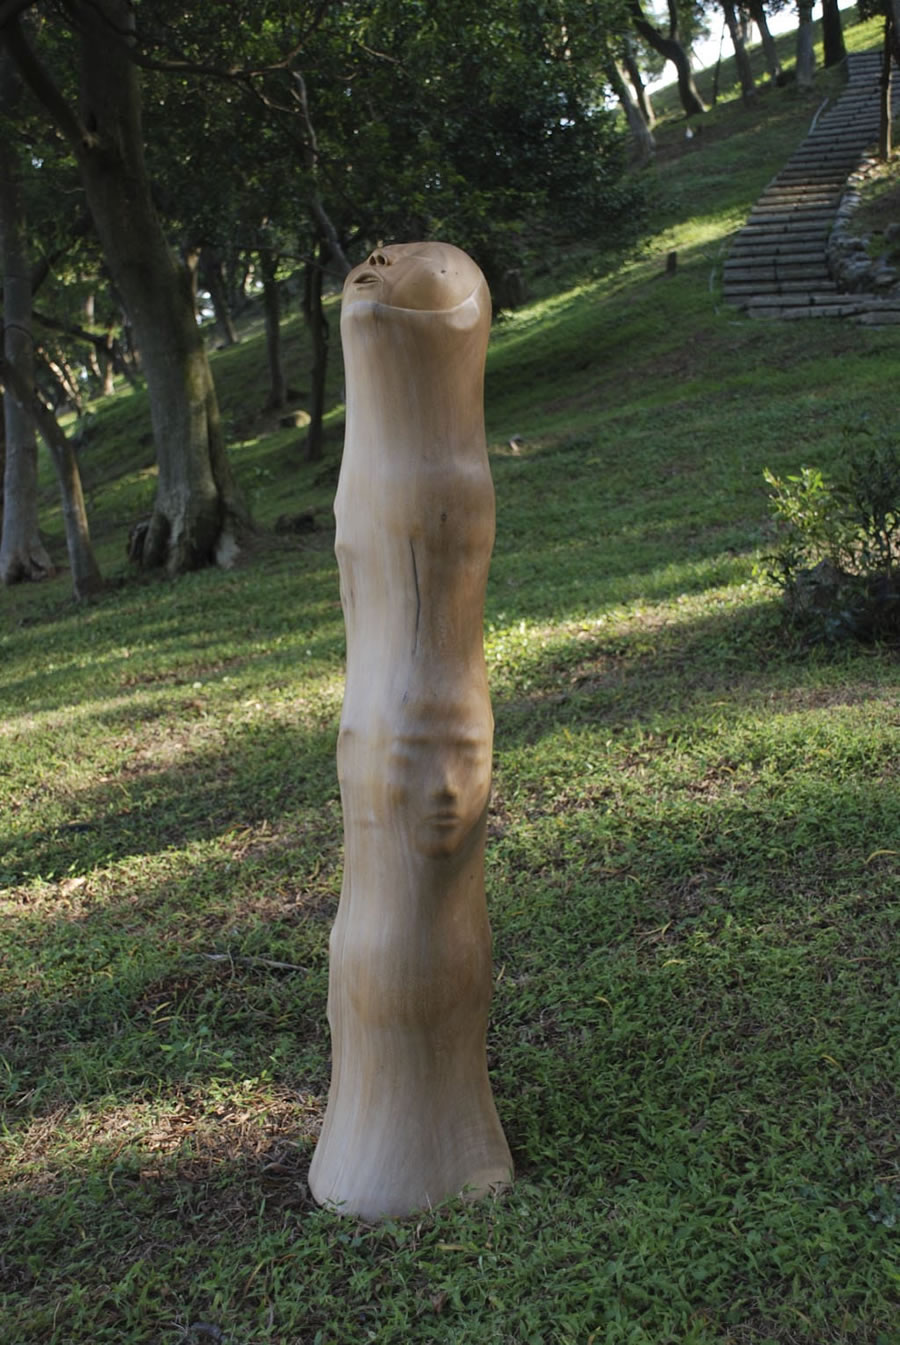 Wood Carved Sculptures By Tung Ming-Chin